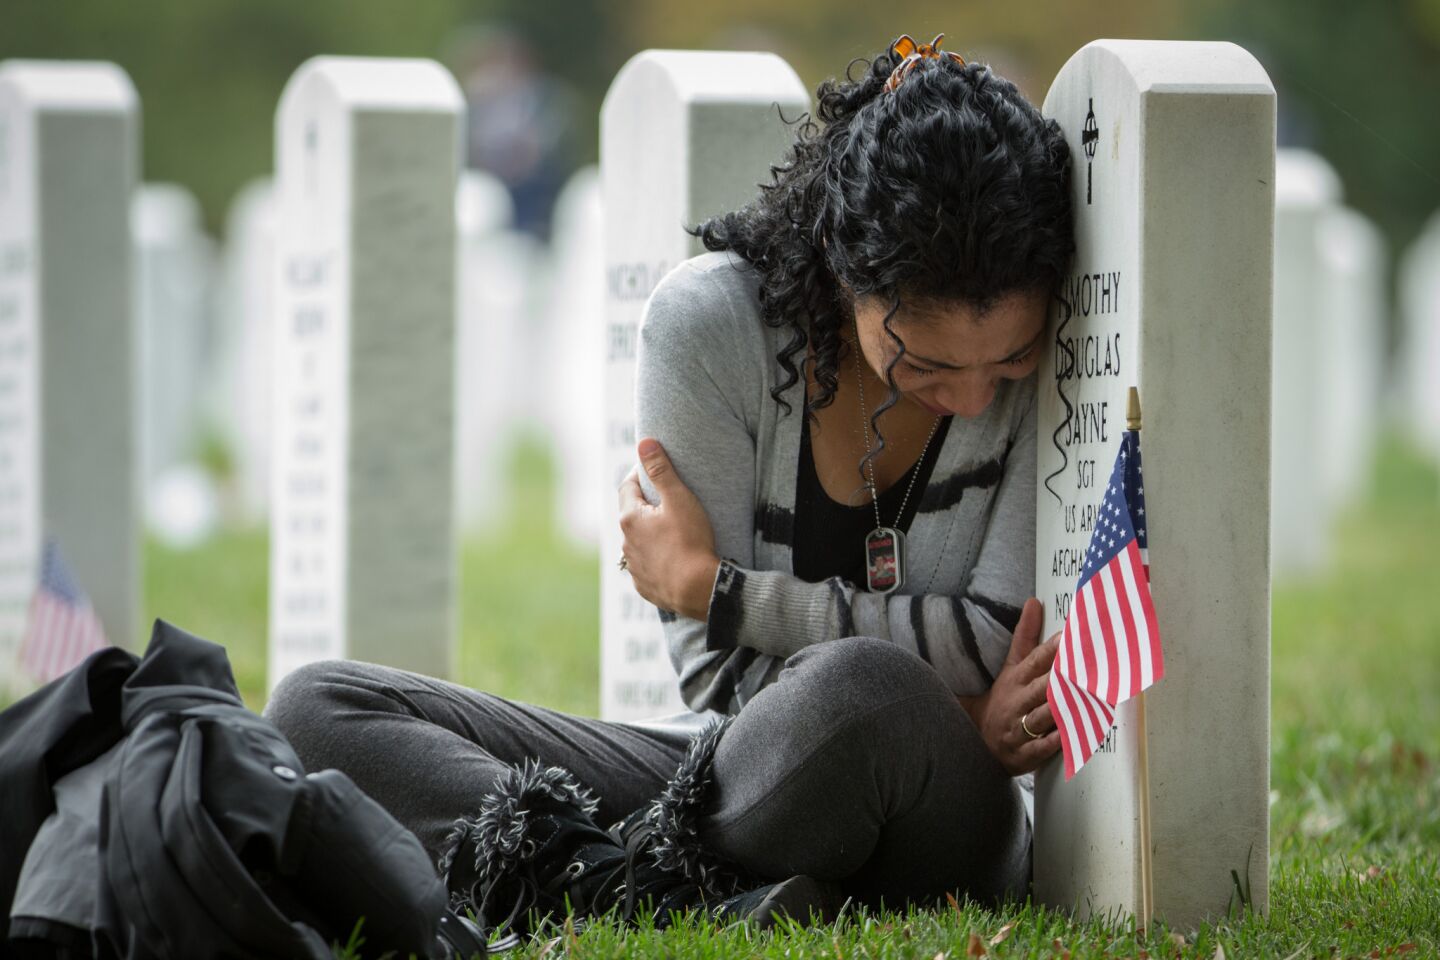 Thania Sayne of Effingham, Ill., leans on the headstone at the grave of her husband, Army Sgt. Timothy D. Sayne, during the playing of taps at a nearby burial service at Arlington National Cemetery.